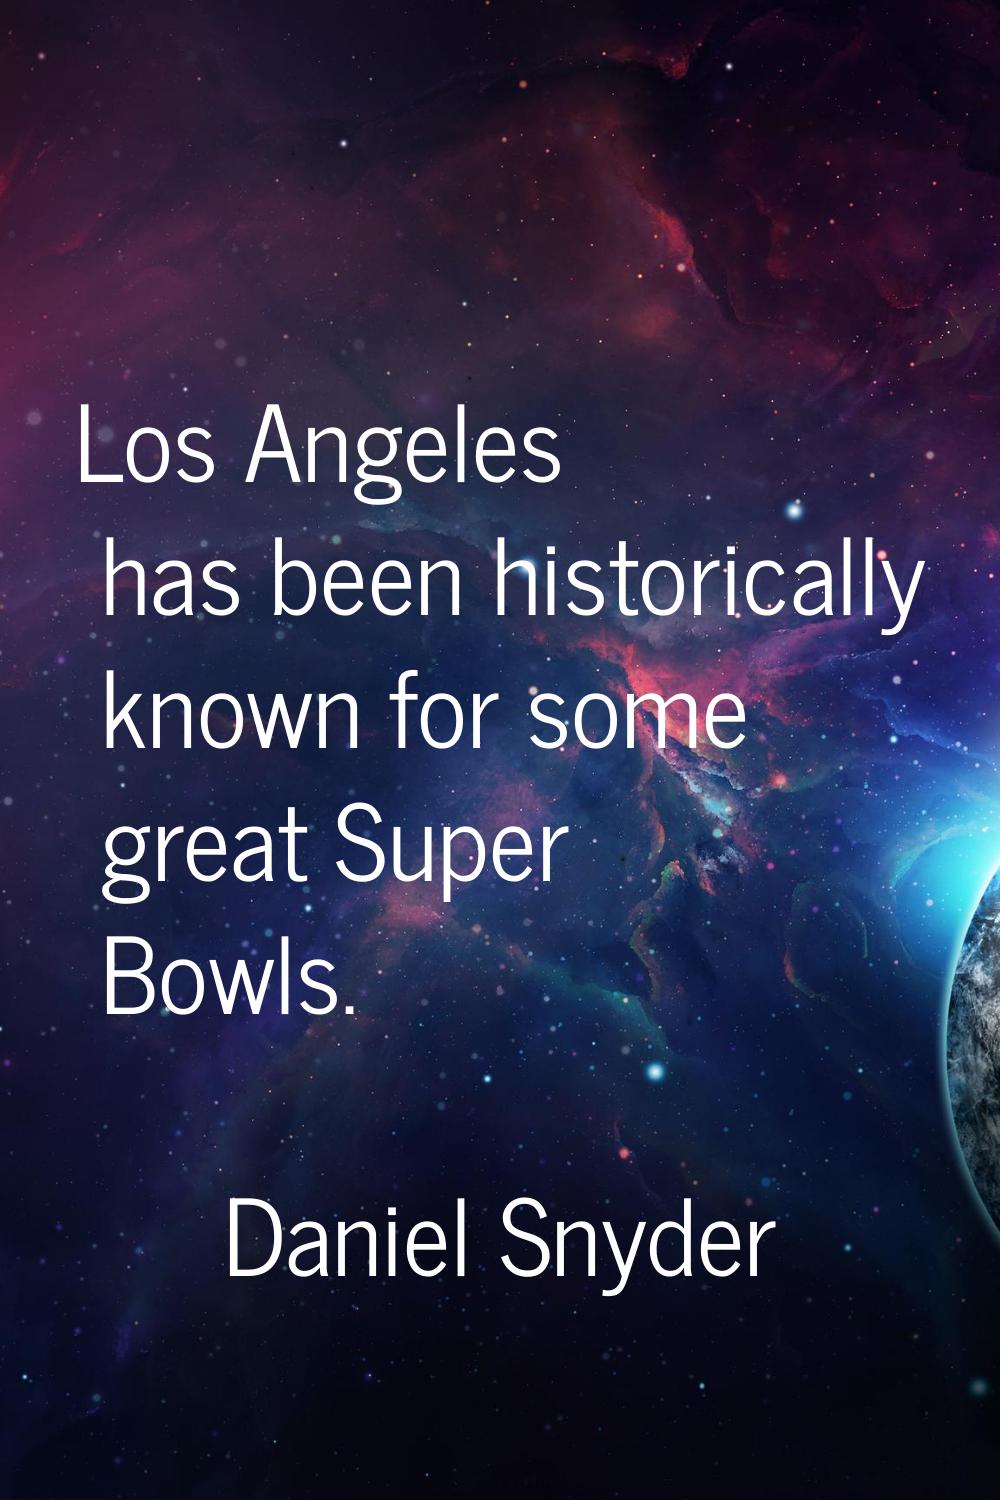 Los Angeles has been historically known for some great Super Bowls.